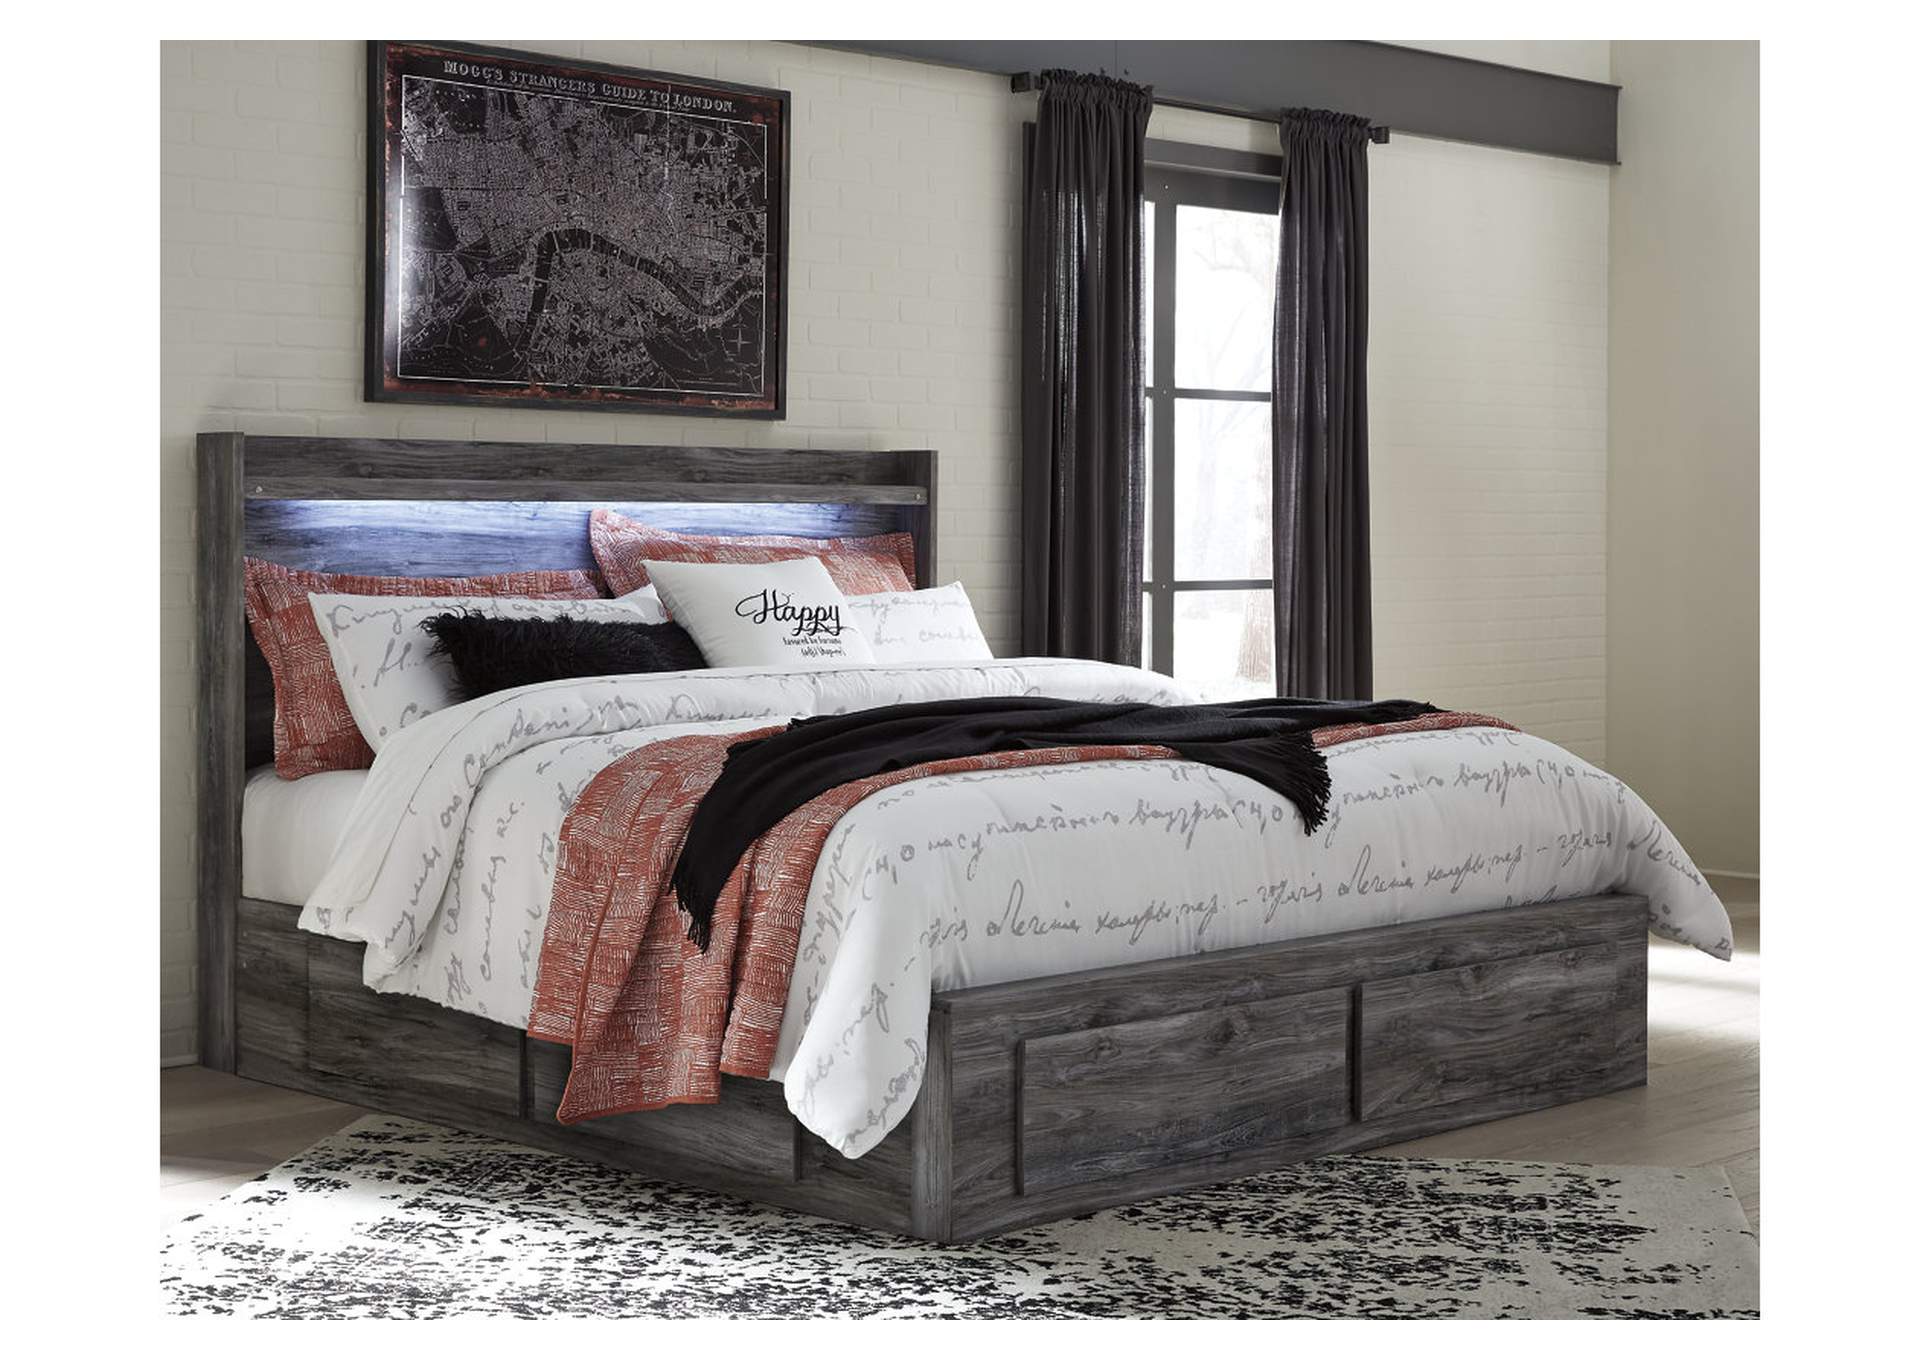 Baystorm King Panel Bed with 4 Storage Drawers,Signature Design By Ashley